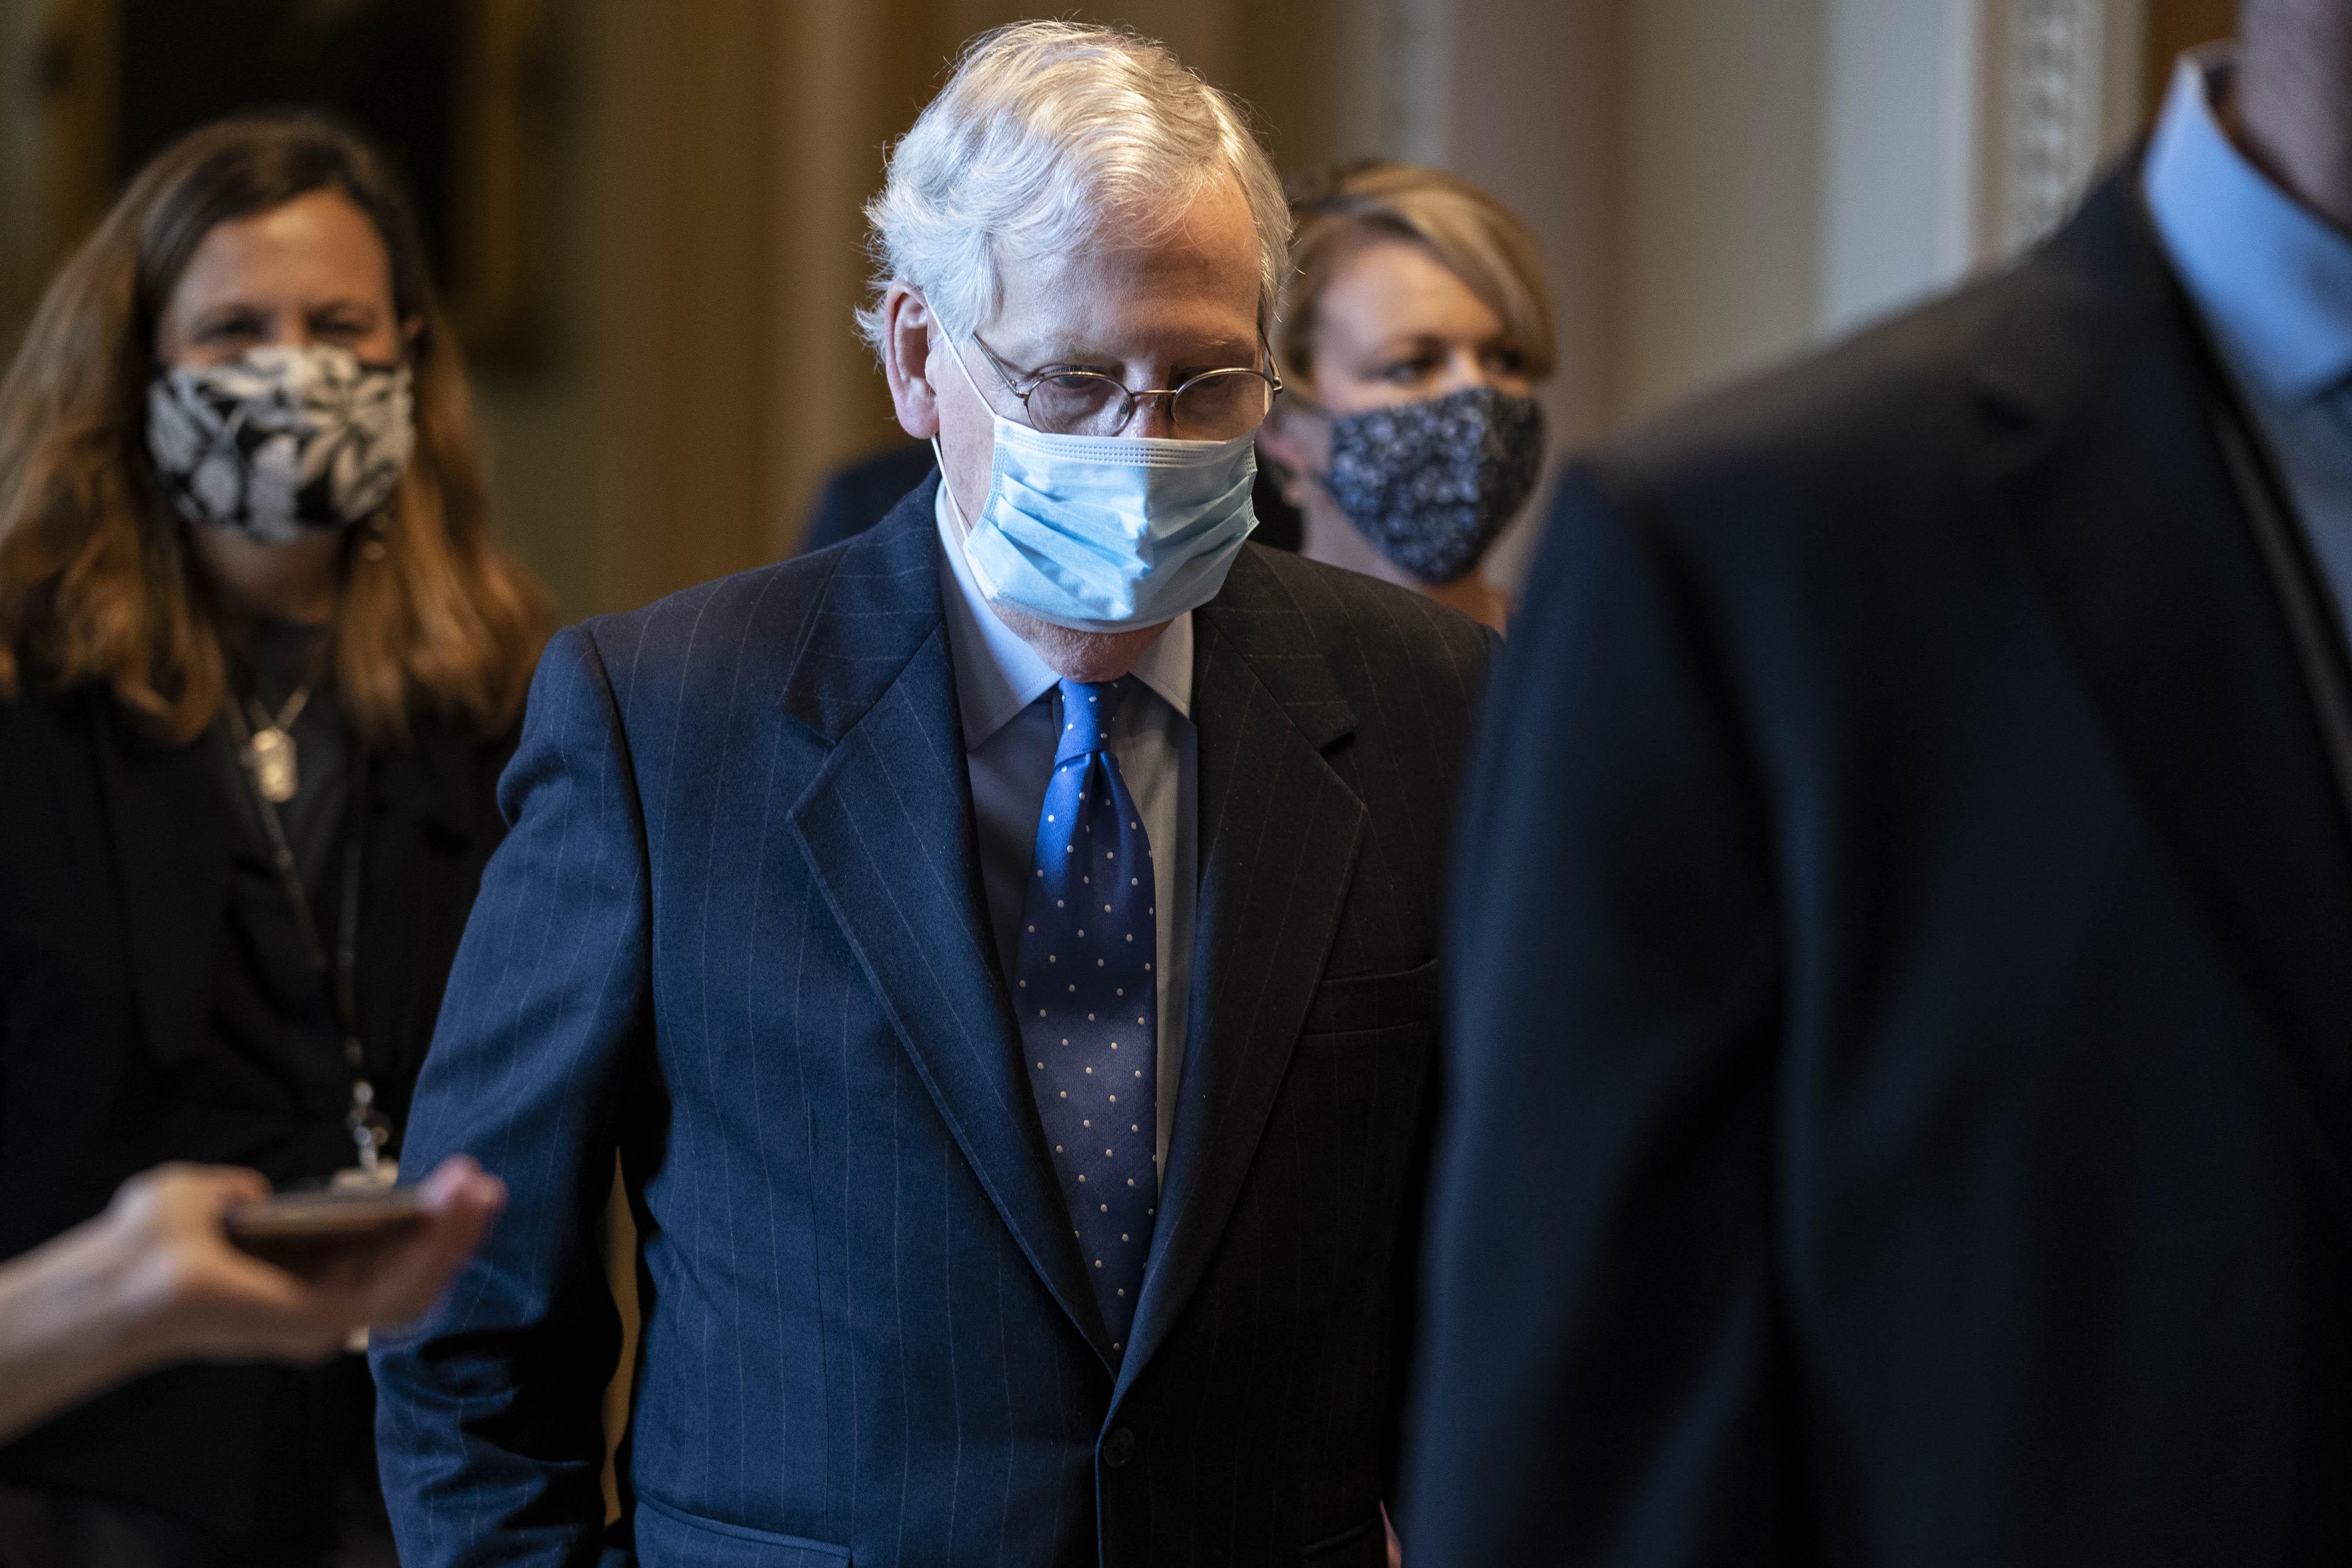 McConnell, wearing a mask, walks in a hallway